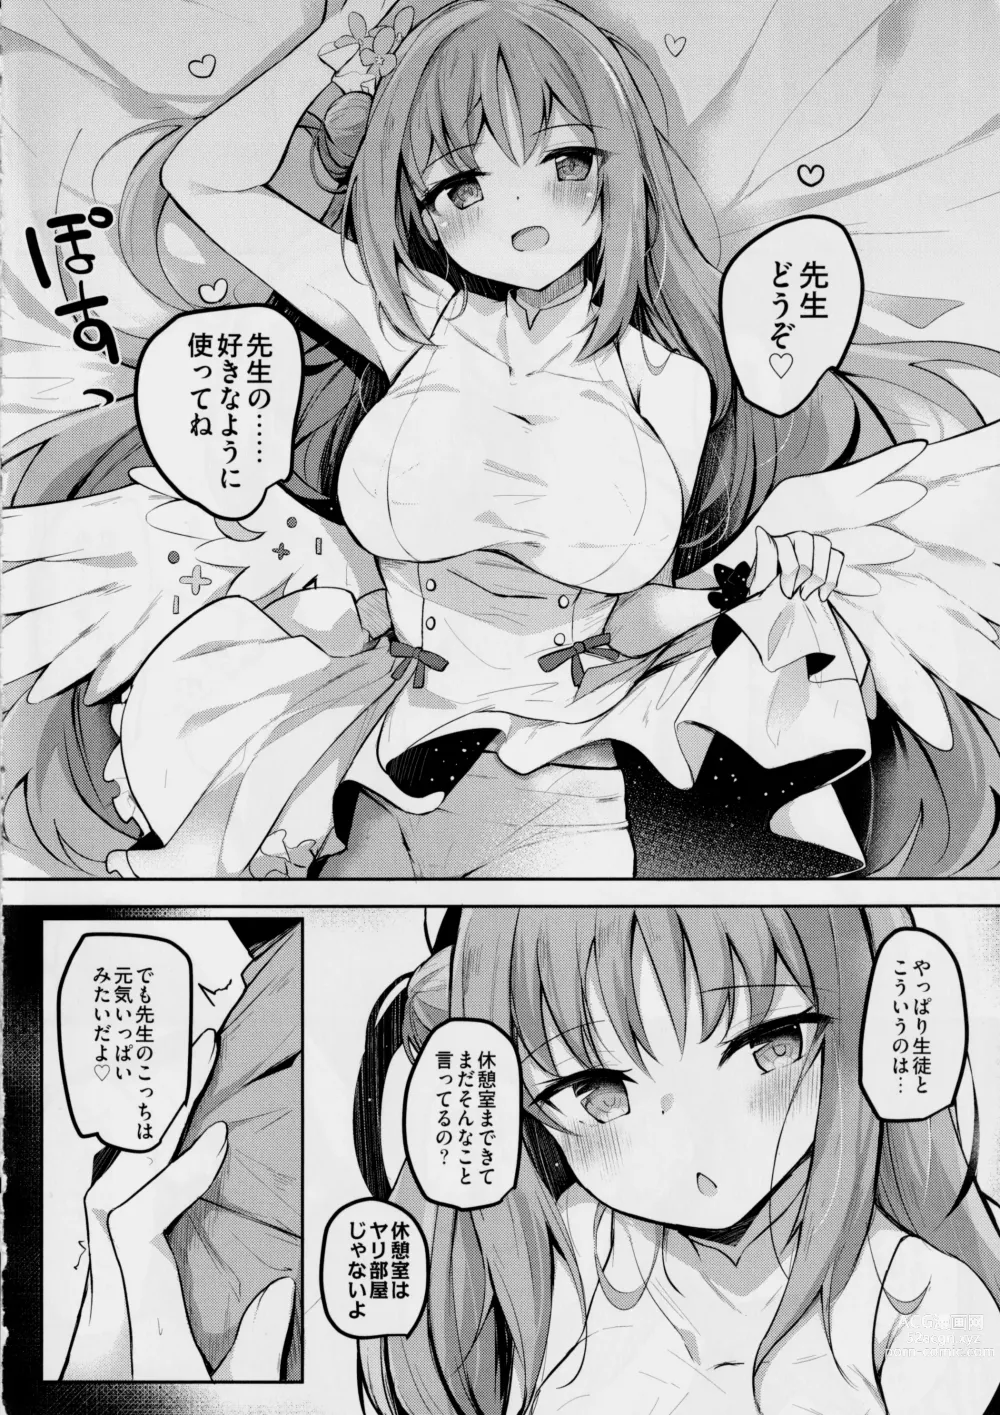 Page 3 of doujinshi Mika no Yuuwaku Tanetsu Ecchi - She seduces her loving teacher and gets him to have sex with her inside.